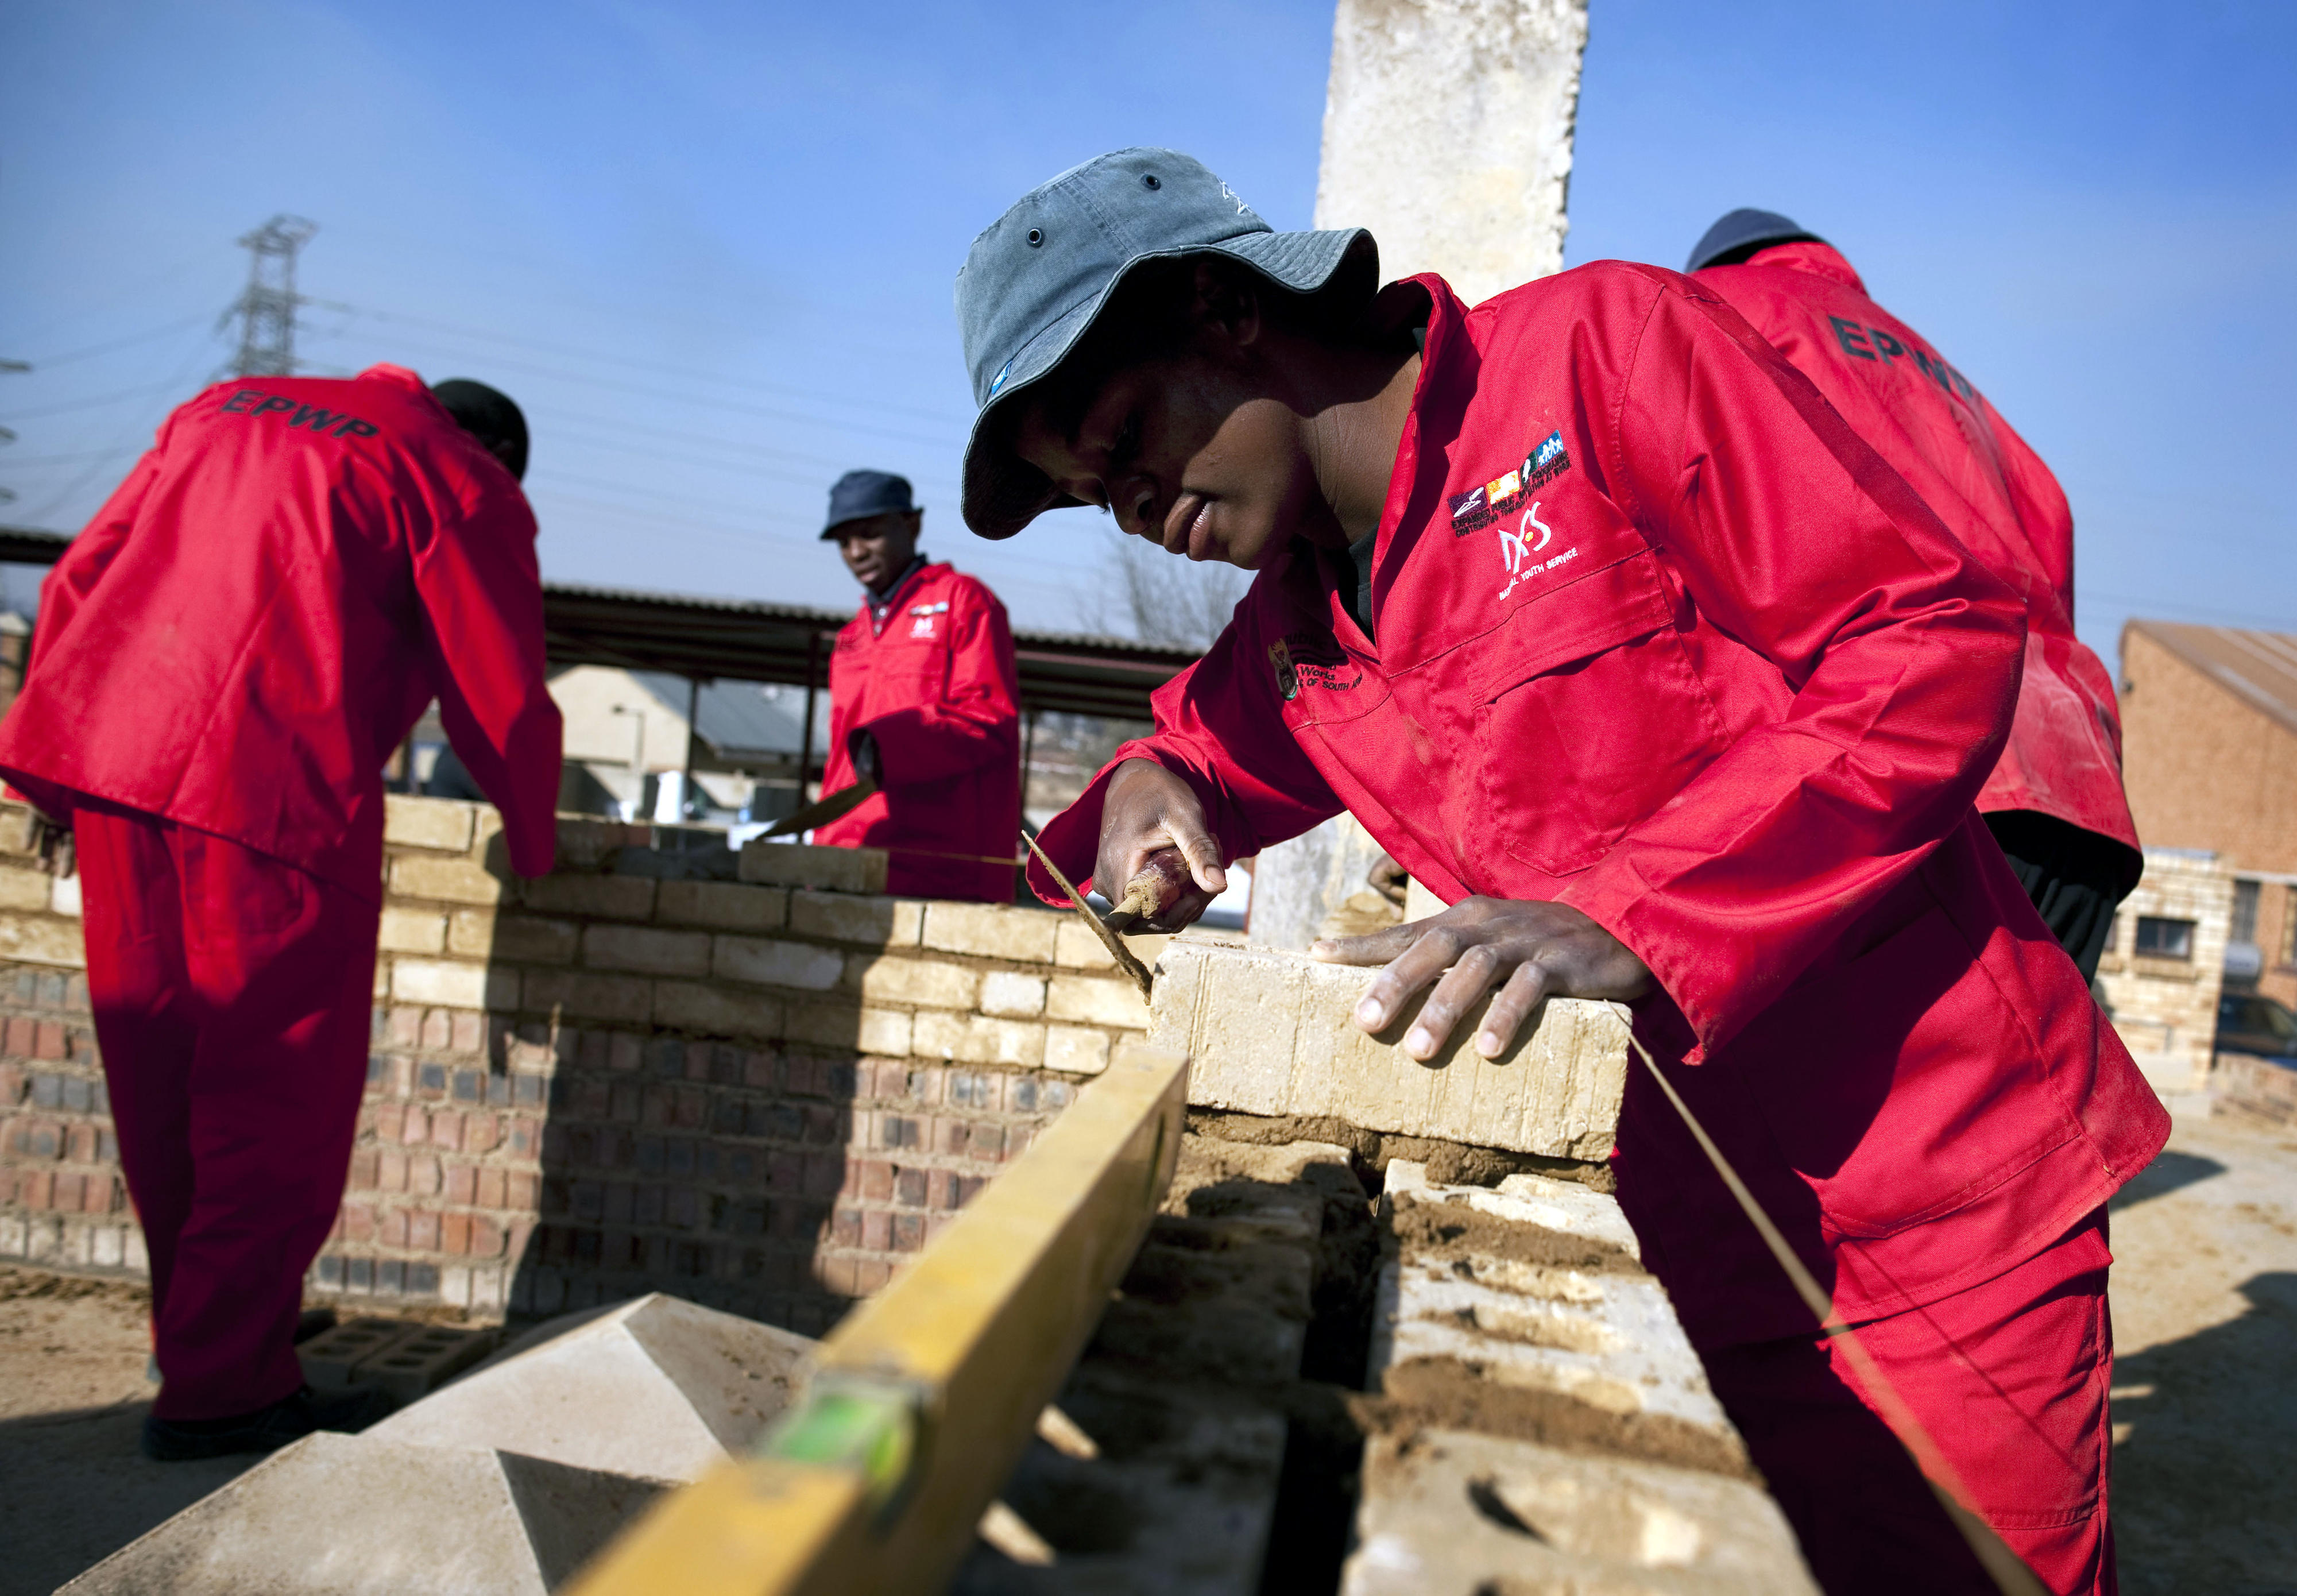 Trainees at a technical training centre in Soweto